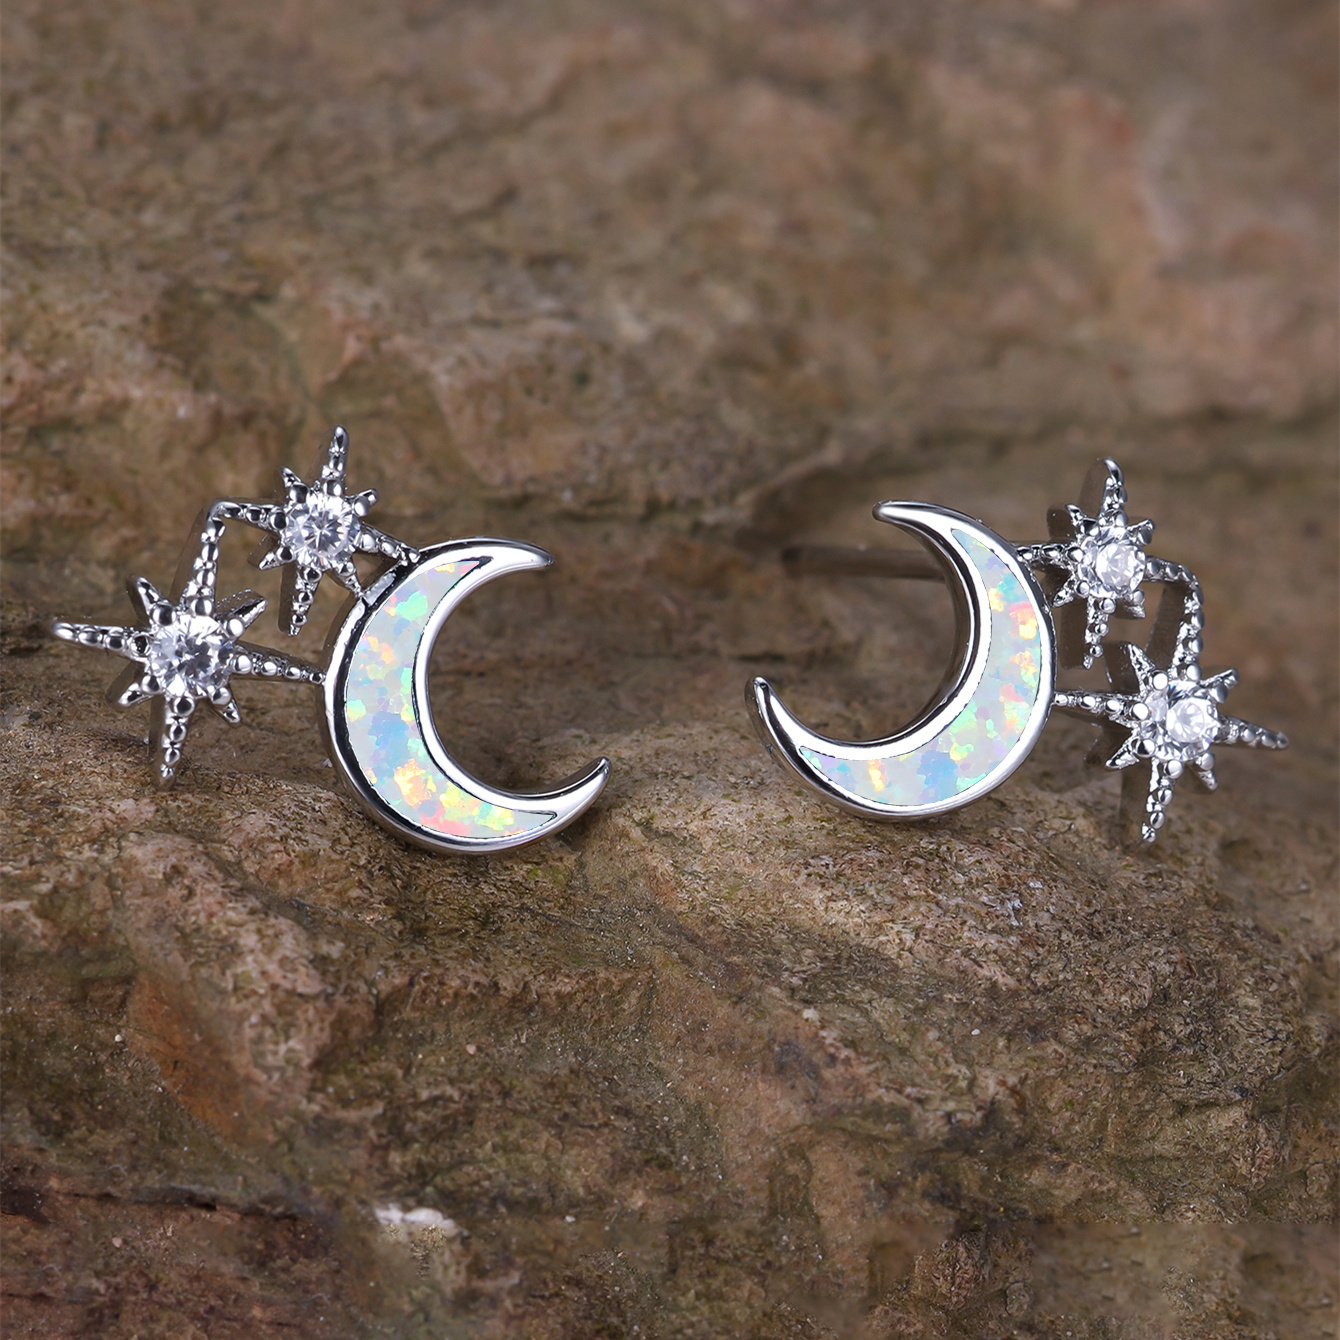 

Exquisite Star Moon Design Stud Earrings Copper Jewelry Embellished With Opal Elegant Leisure Style For Women Gift